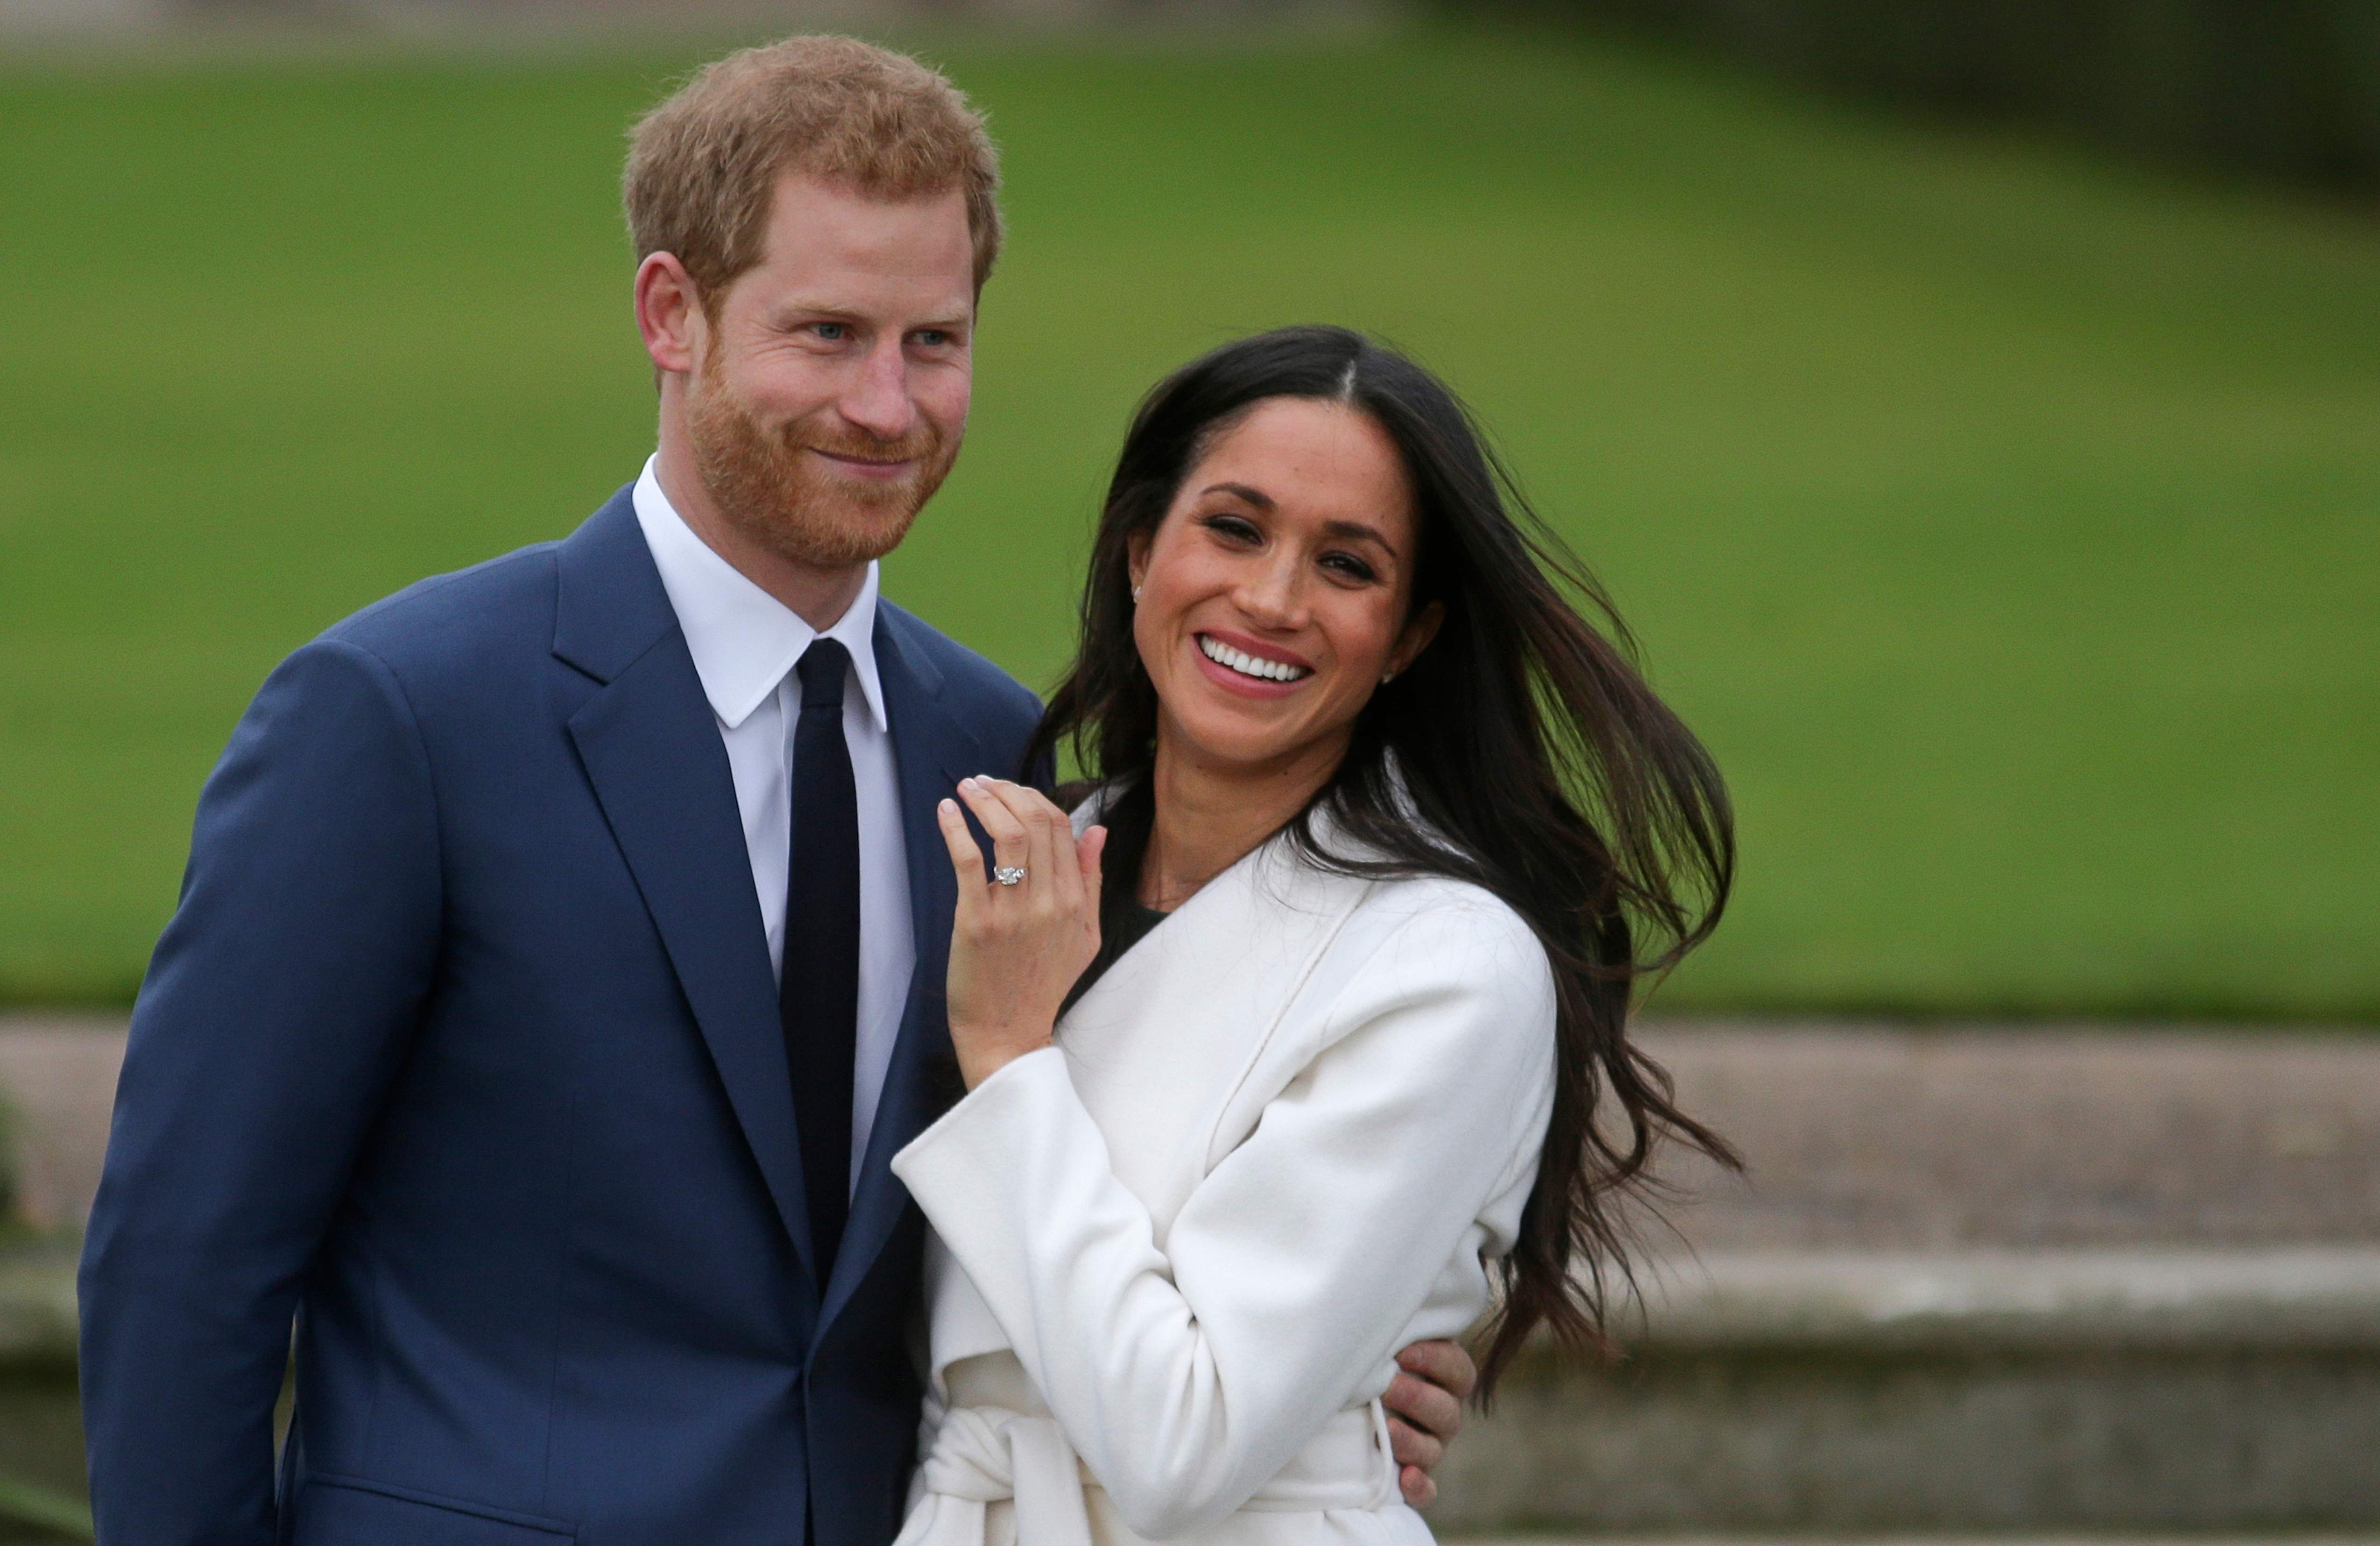 Britain’s Prince Harry stands with his fiancée, US actress Meghan Markle, as she shows off her engagement ring following the announcement of their betrothal on November 27. The couple are expected to get married in May next year. Photo: AFP